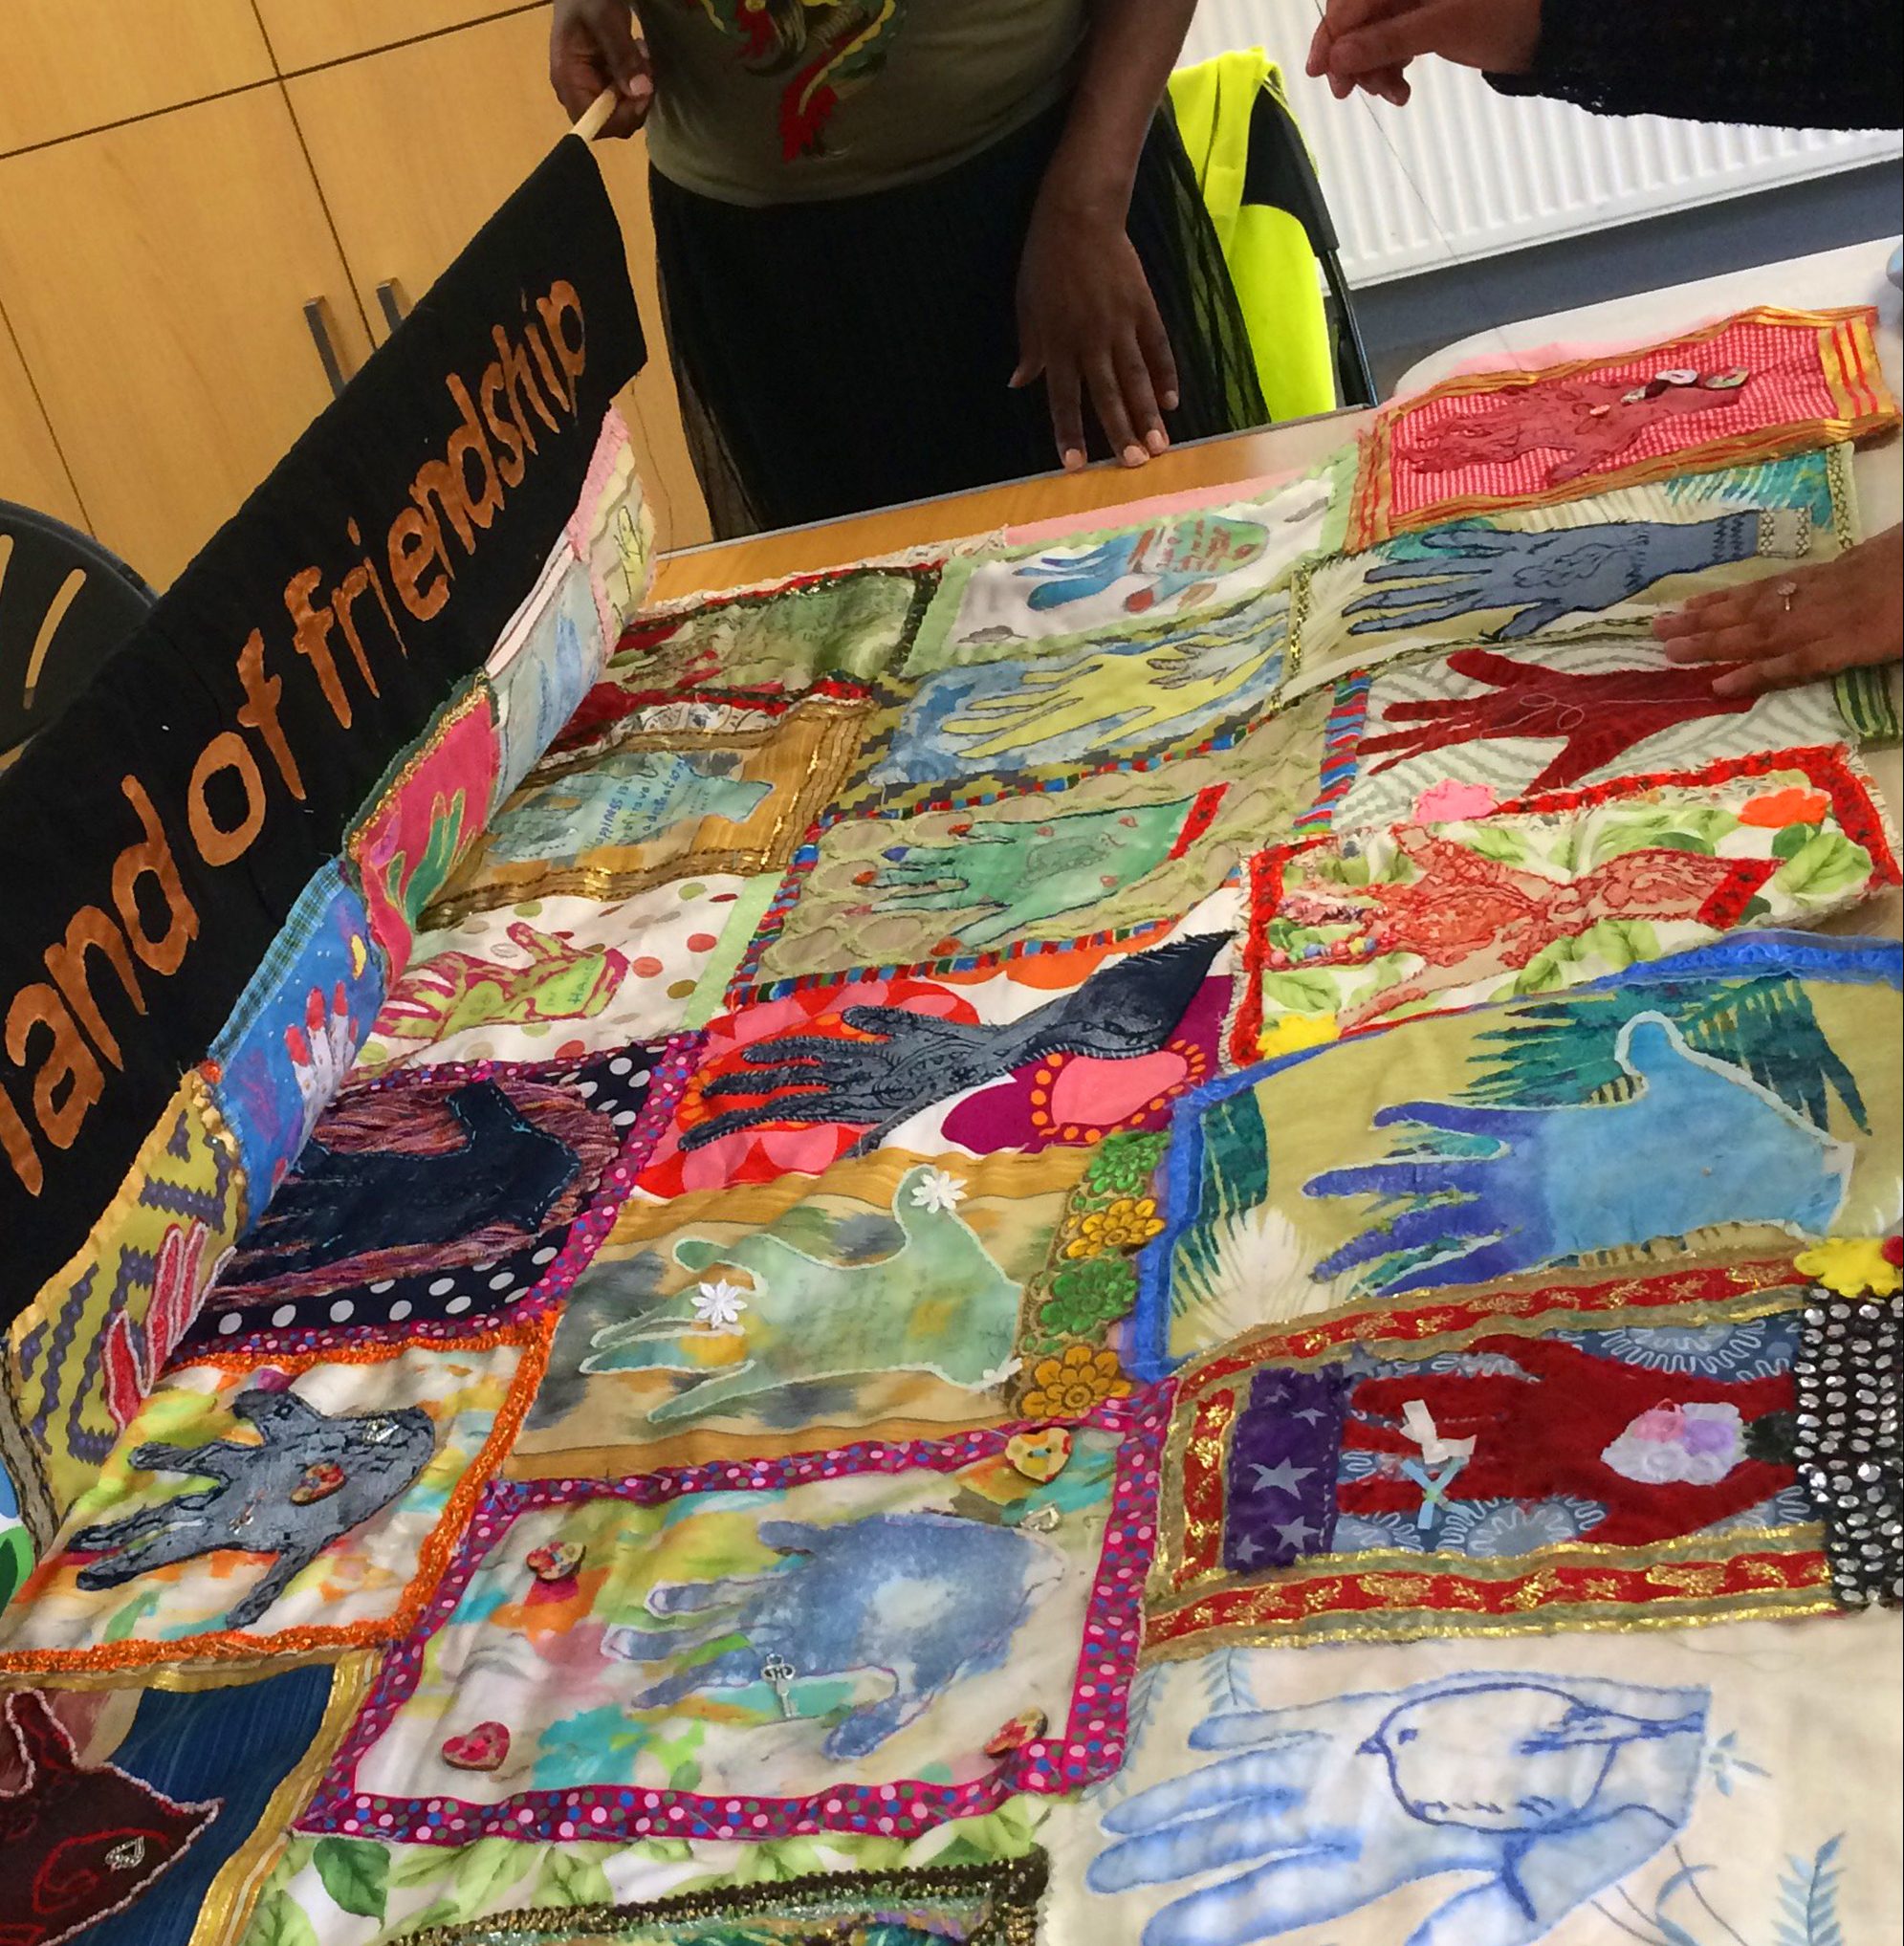 Multi-coloured artwork made out of fabric displayed on a table.